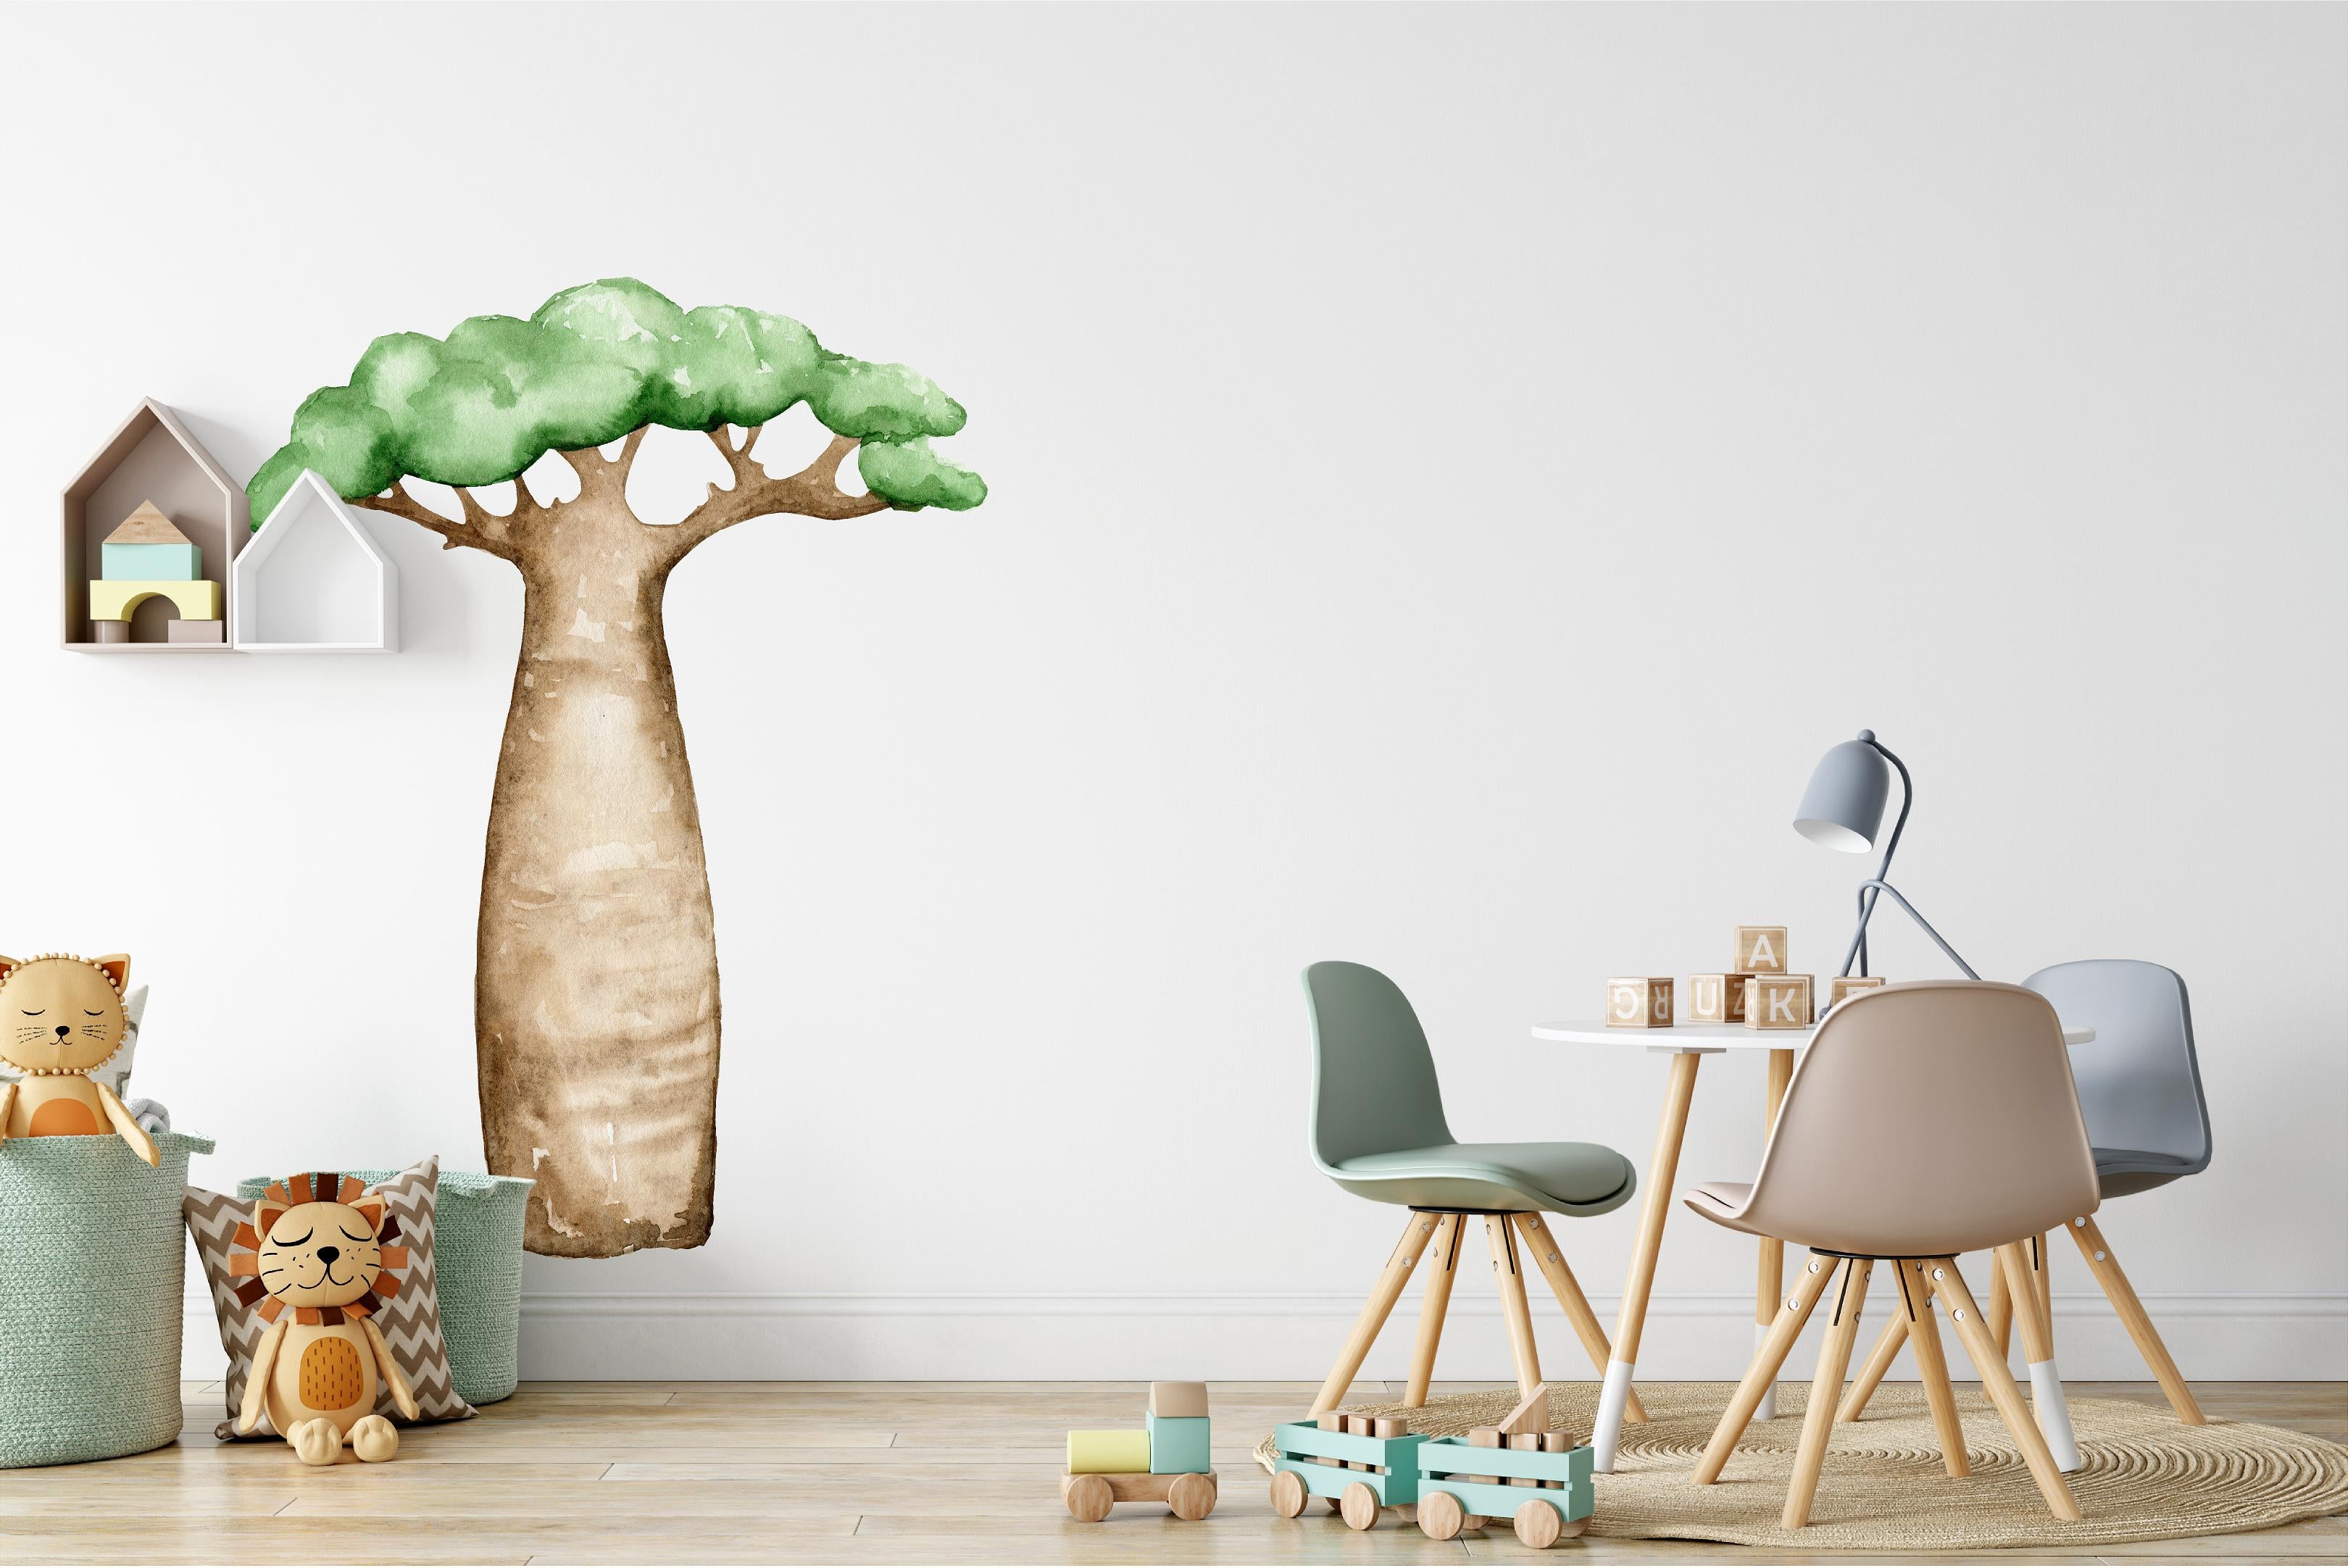 African Baobab Tree Wall Decal Removable Fabric Vinyl Wall Sticker | DecalBaby